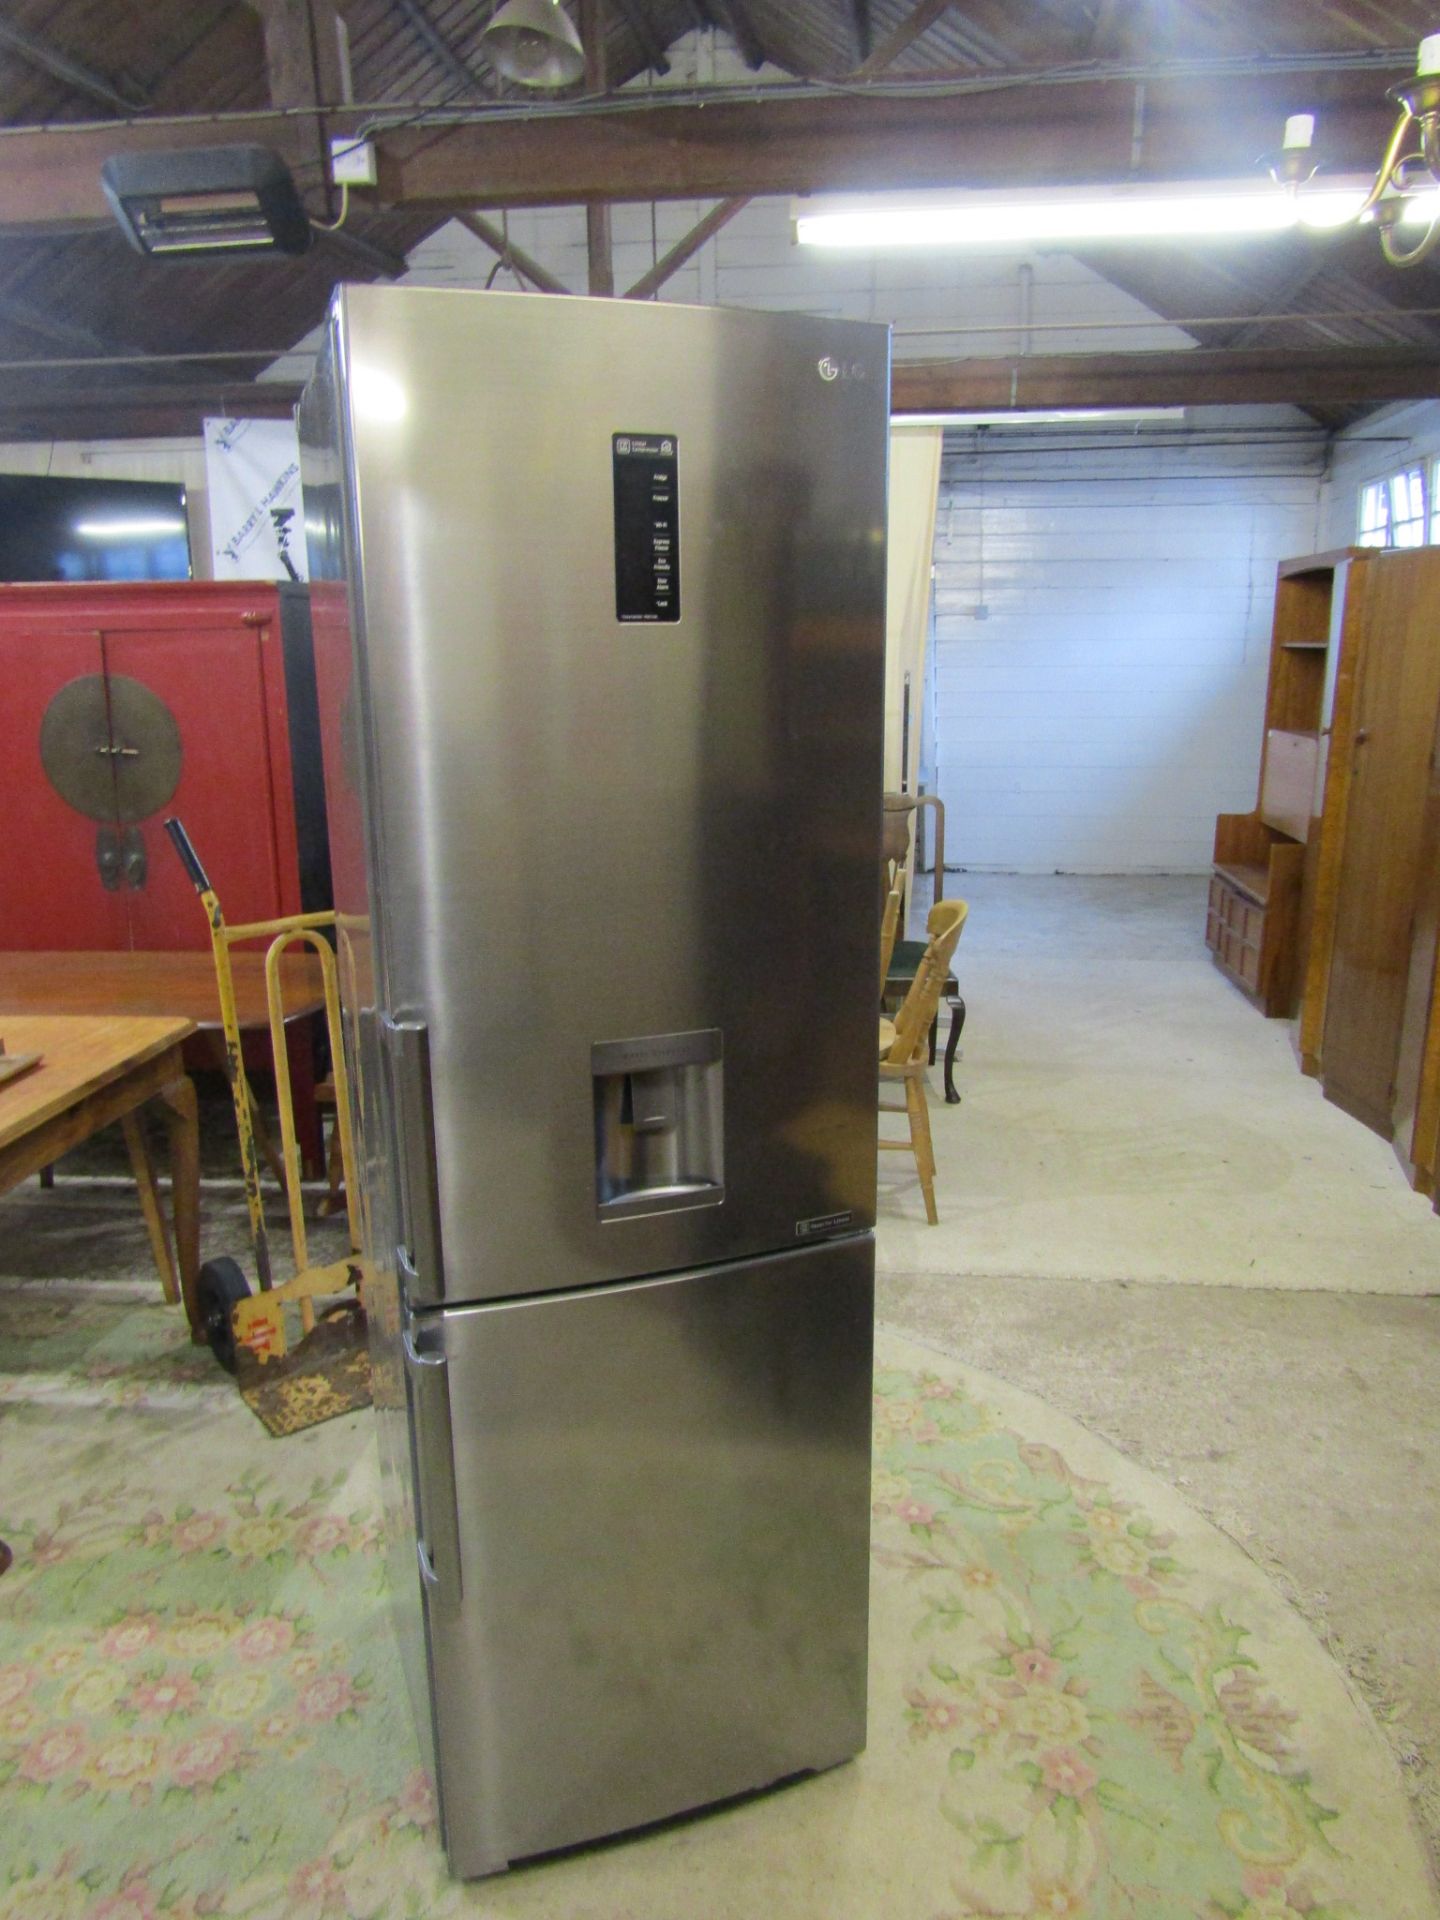 LG fridge freezer with water dispenser from a house clearance